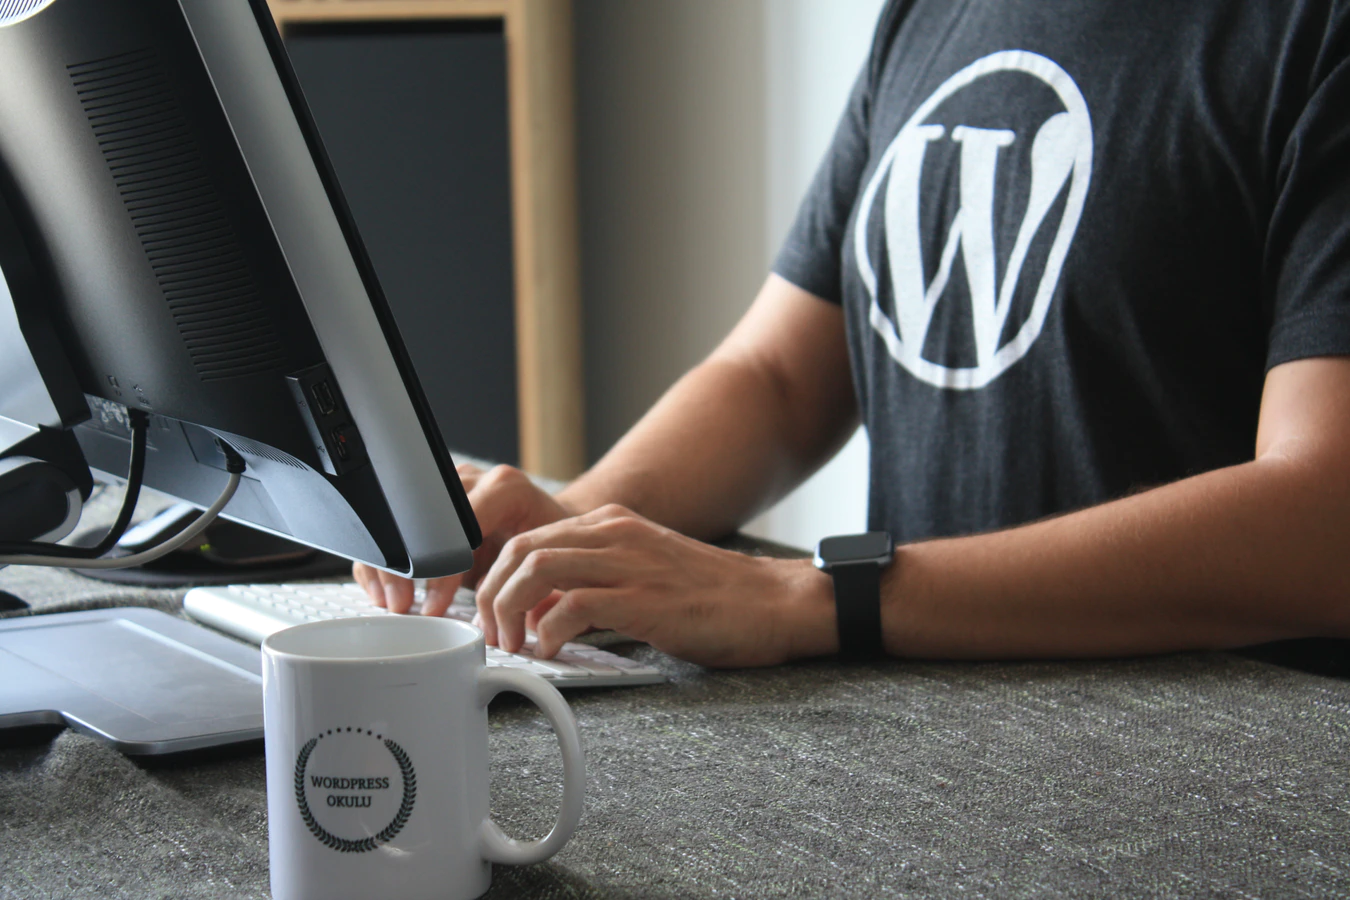 How to turn your WordPress installation into a high selling machine